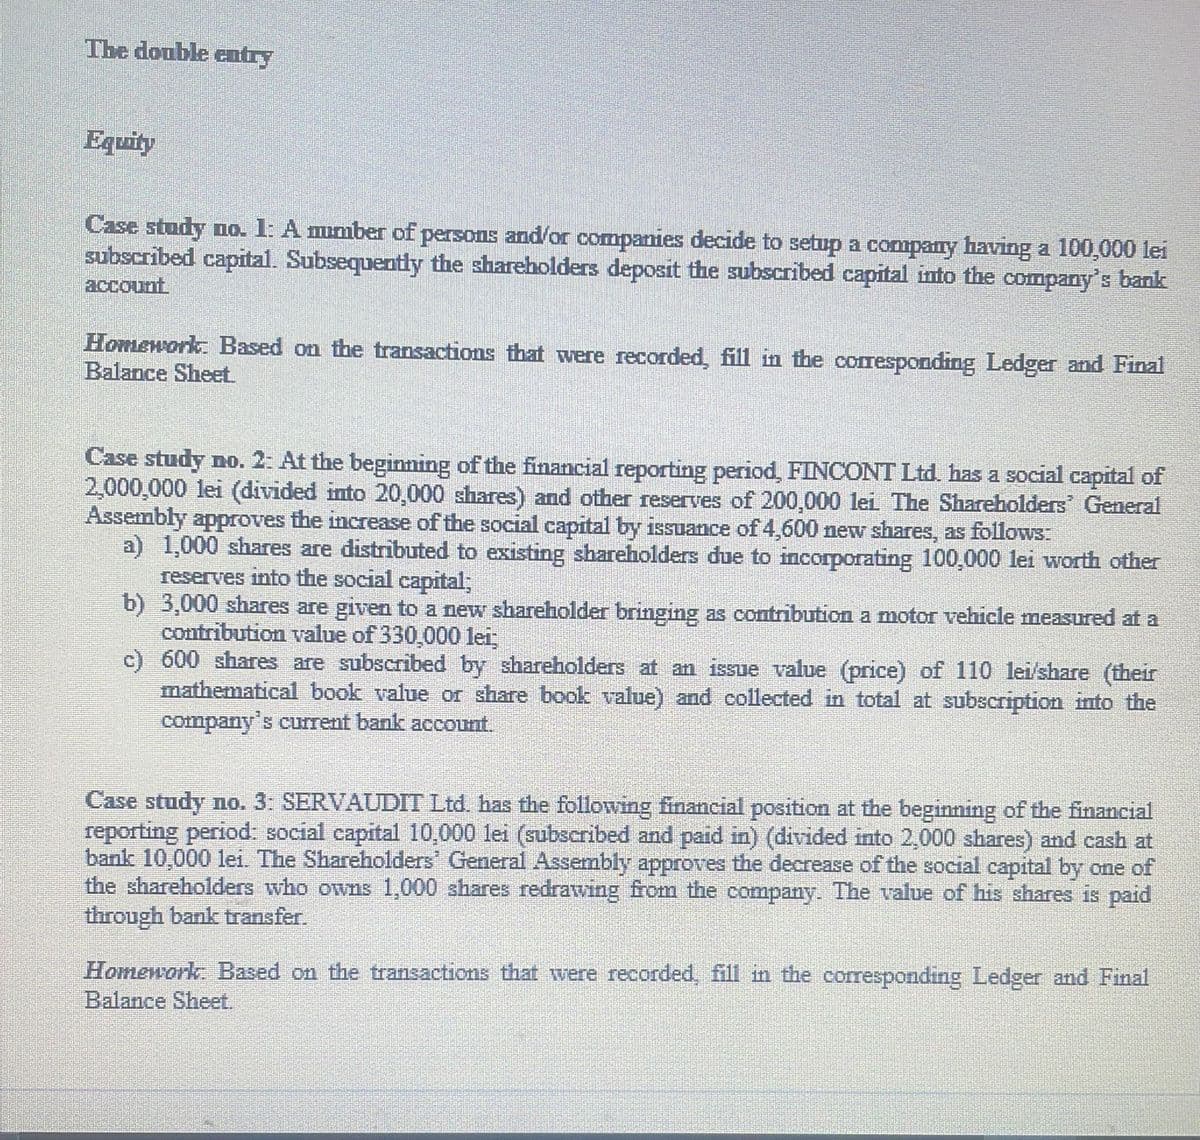 The double cntry
Equity
Case study no. 1: A mumber of persons and/or companies decide to setup a company having a 100,000 lei
subscribed capital. Subsequently the shareholders deposit the subscribed capital into the company's bank
account
Homework. Based on the transactions that were recorded, fill in the corresponding Ledger and Final
Balance Sheet
Case study no. 2: At the beginning of the financial reporting period, FINCONT Ltd. has a social capital of
2,000,000 lei (divided into 20,000 shares) and other reserves of 200,000 lei The Shareholders General
Assembly approves the increase of the social capital by issuance of 4,600 new shares, as follows:
a) 1,000 shares are distributed to existing shareholders due to incorporating 100,000 lei worth other
reserves into the social capital;
b) 3,000 shares are given to a new shareholder bringing as contribution a motor vehicle measured at a
contribution value of 330,000 lei
c) 600 shares are subscribed by shareholders at an issue value (price) of 110 lei/share (their
mathematical book value or share book value) and collected in total at subscription into the
company's current bank account.
Case study no. 3: SERVAUDIT Ltd. has the following financial position at the beginning of the financial
reporting period: social capital 10,000 lei (subscribed and paid in) (divided into 2,000 shares) and cash at
bank 10,000 lei. The Shareholders' General Assembly approves the decrease of the social capital by one of
the shareholders who owns 1,000 shares redrawing from the company. The value of his shares is paid
through bank transfer.
Homework: Based on the transactions that were recorded, fill in the corresponding Ledger and Final
Balance Sheet.
